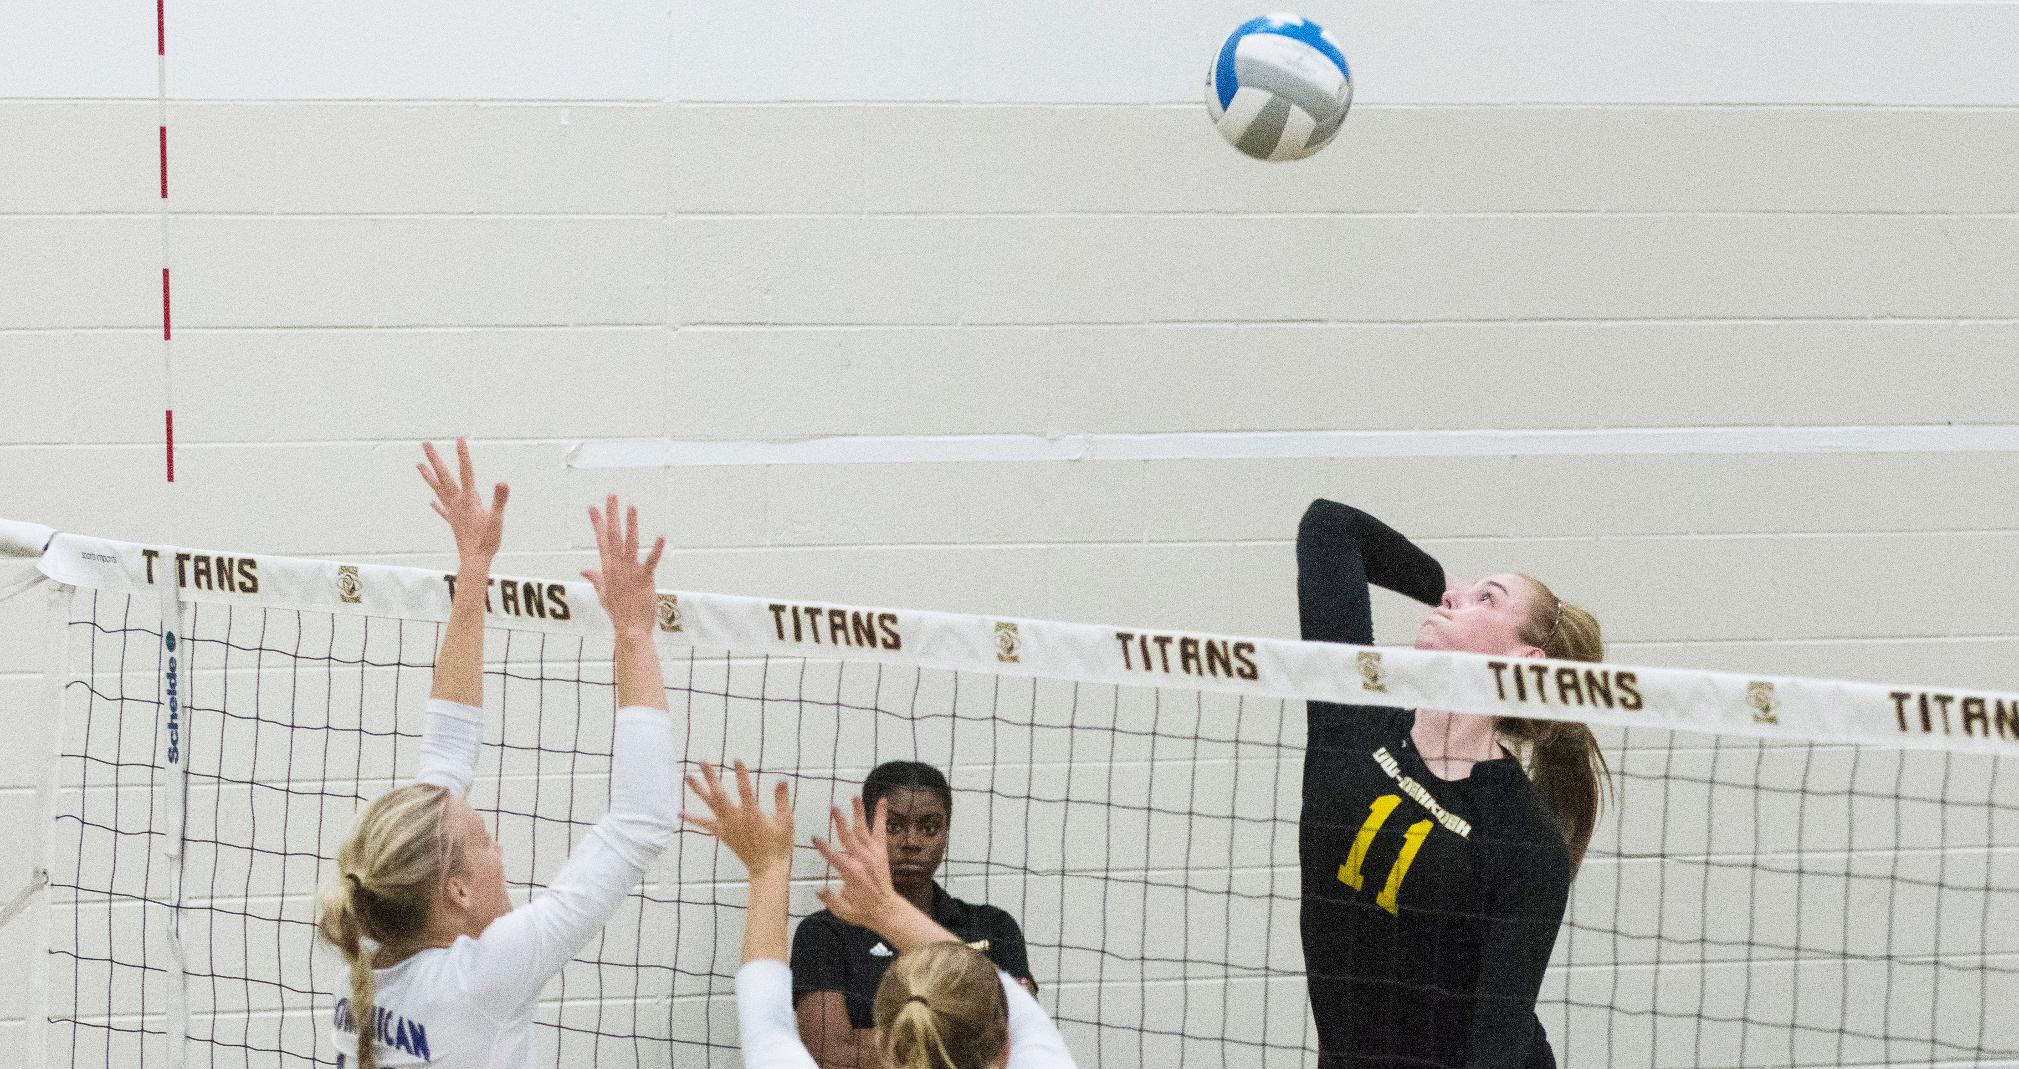 Samantha Jaeke was named to the UW-Oshkosh Invitational All-Tournament Team after totaling a .361 hitting percentage with 39 kills and nine service aces.